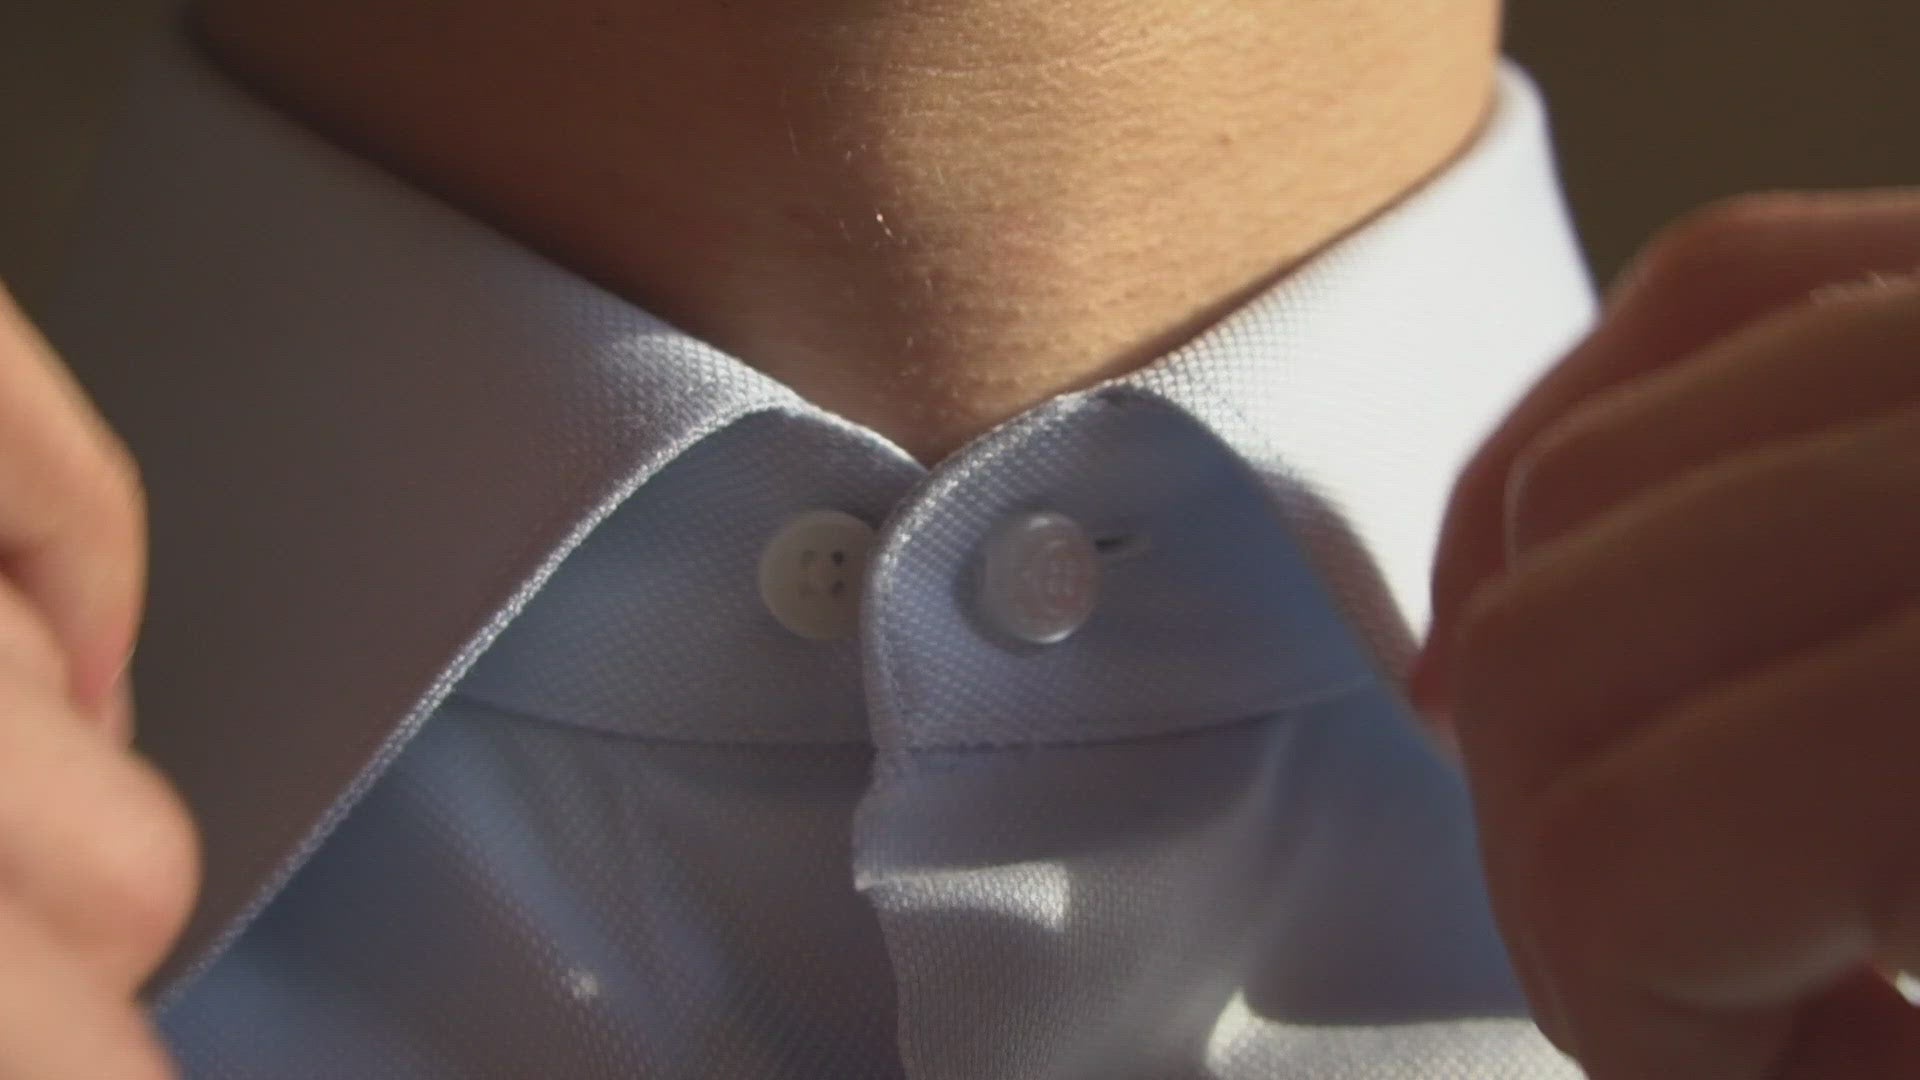 Video presentation of how to wear a shirt and cuff collar extender